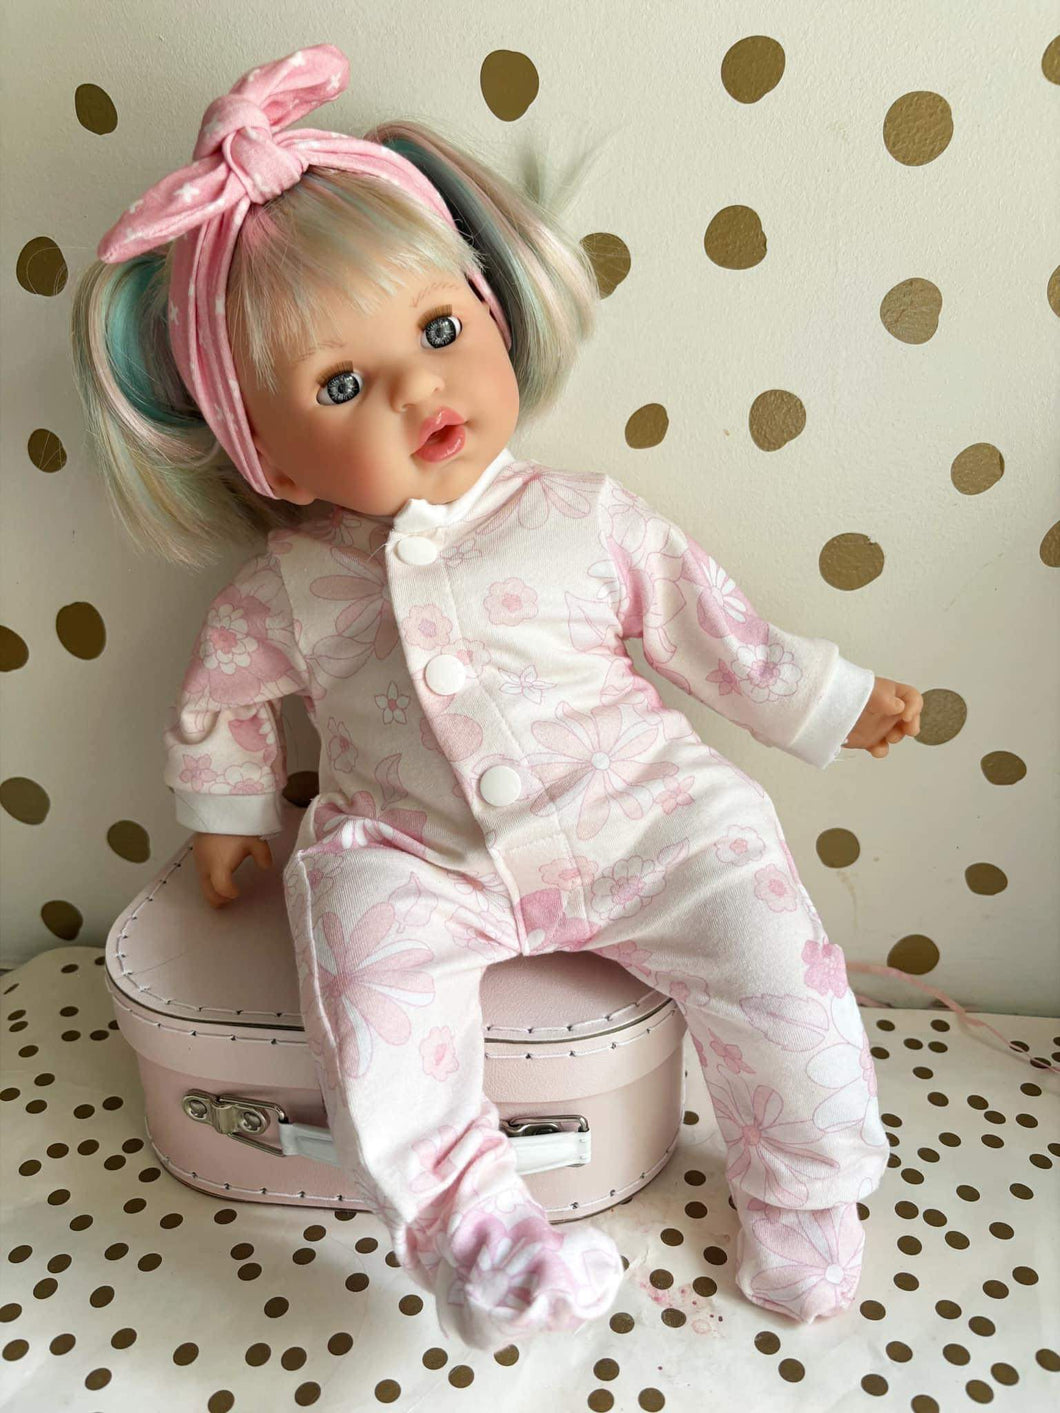 Exclusive pastel 16” soft body doll